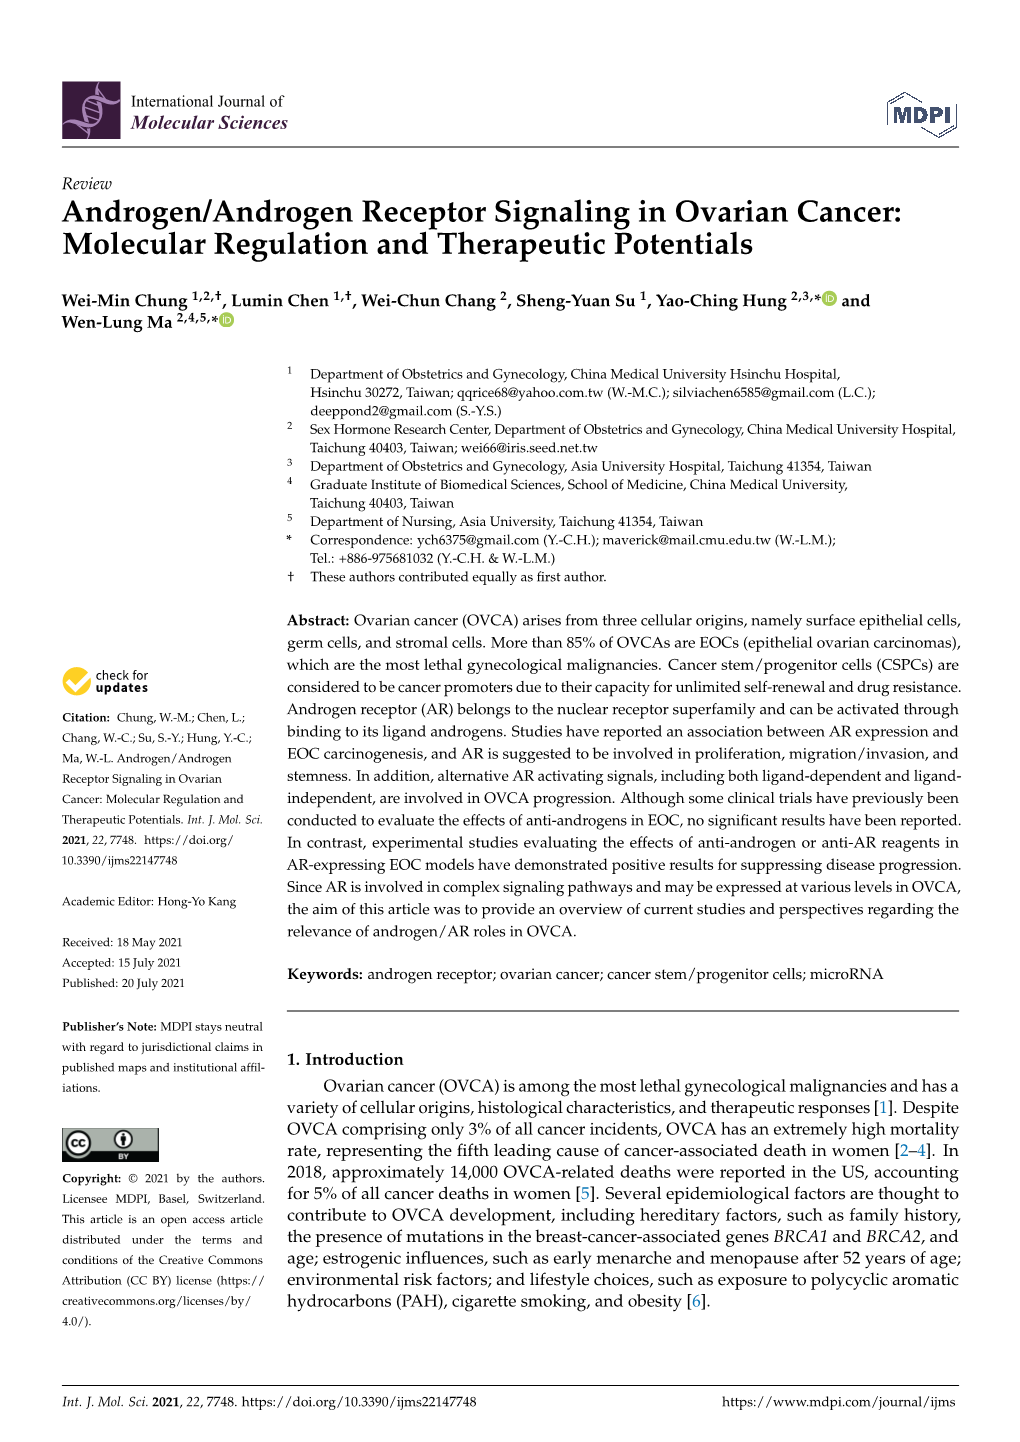 Androgen/Androgen Receptor Signaling in Ovarian Cancer: Molecular Regulation and Therapeutic Potentials